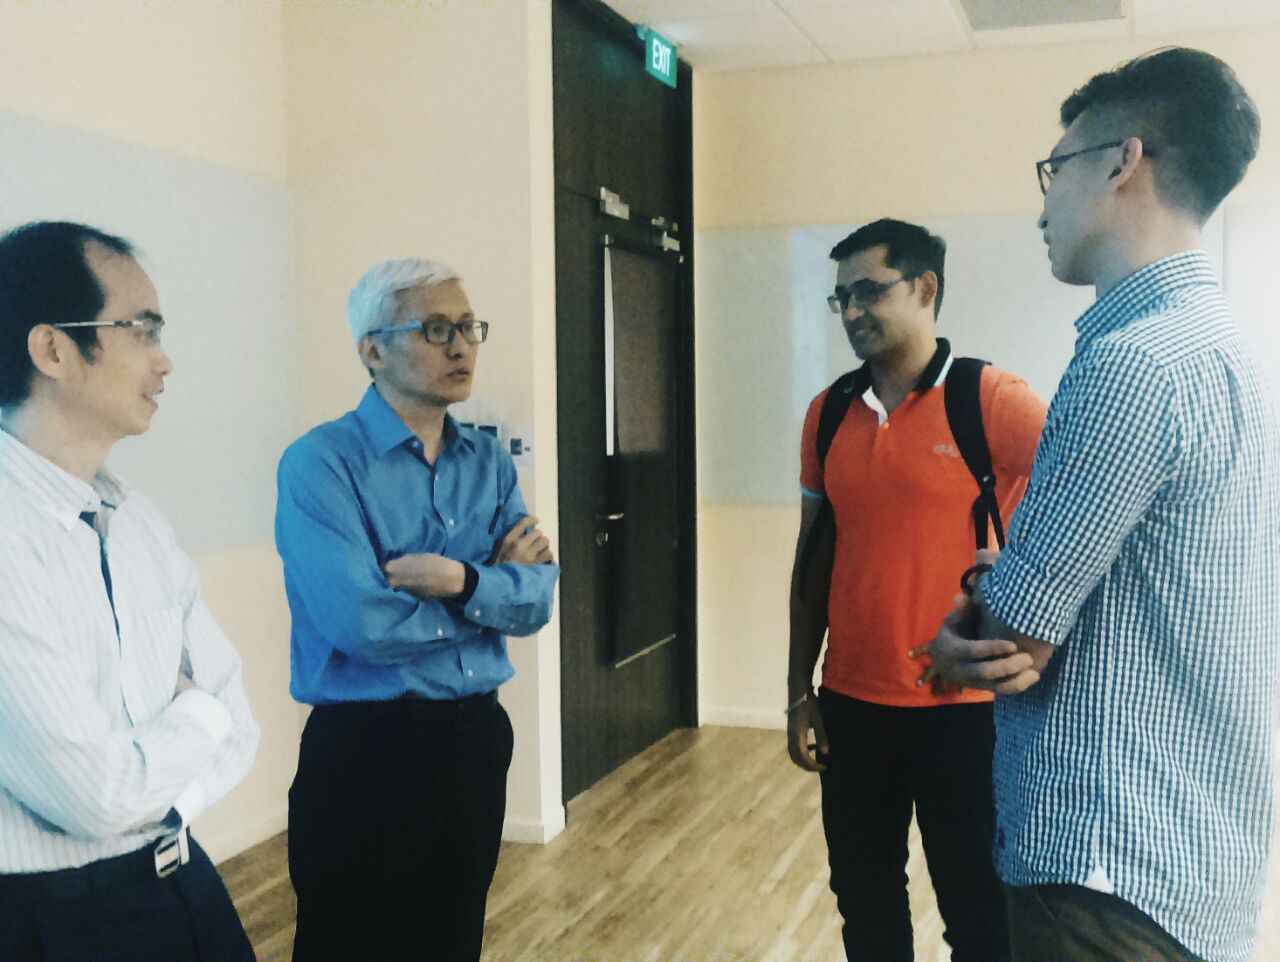 Mr Herman Tan (second from left), a Visiting Research Fellow at the Institute of Operations Research and Analytics at NUS